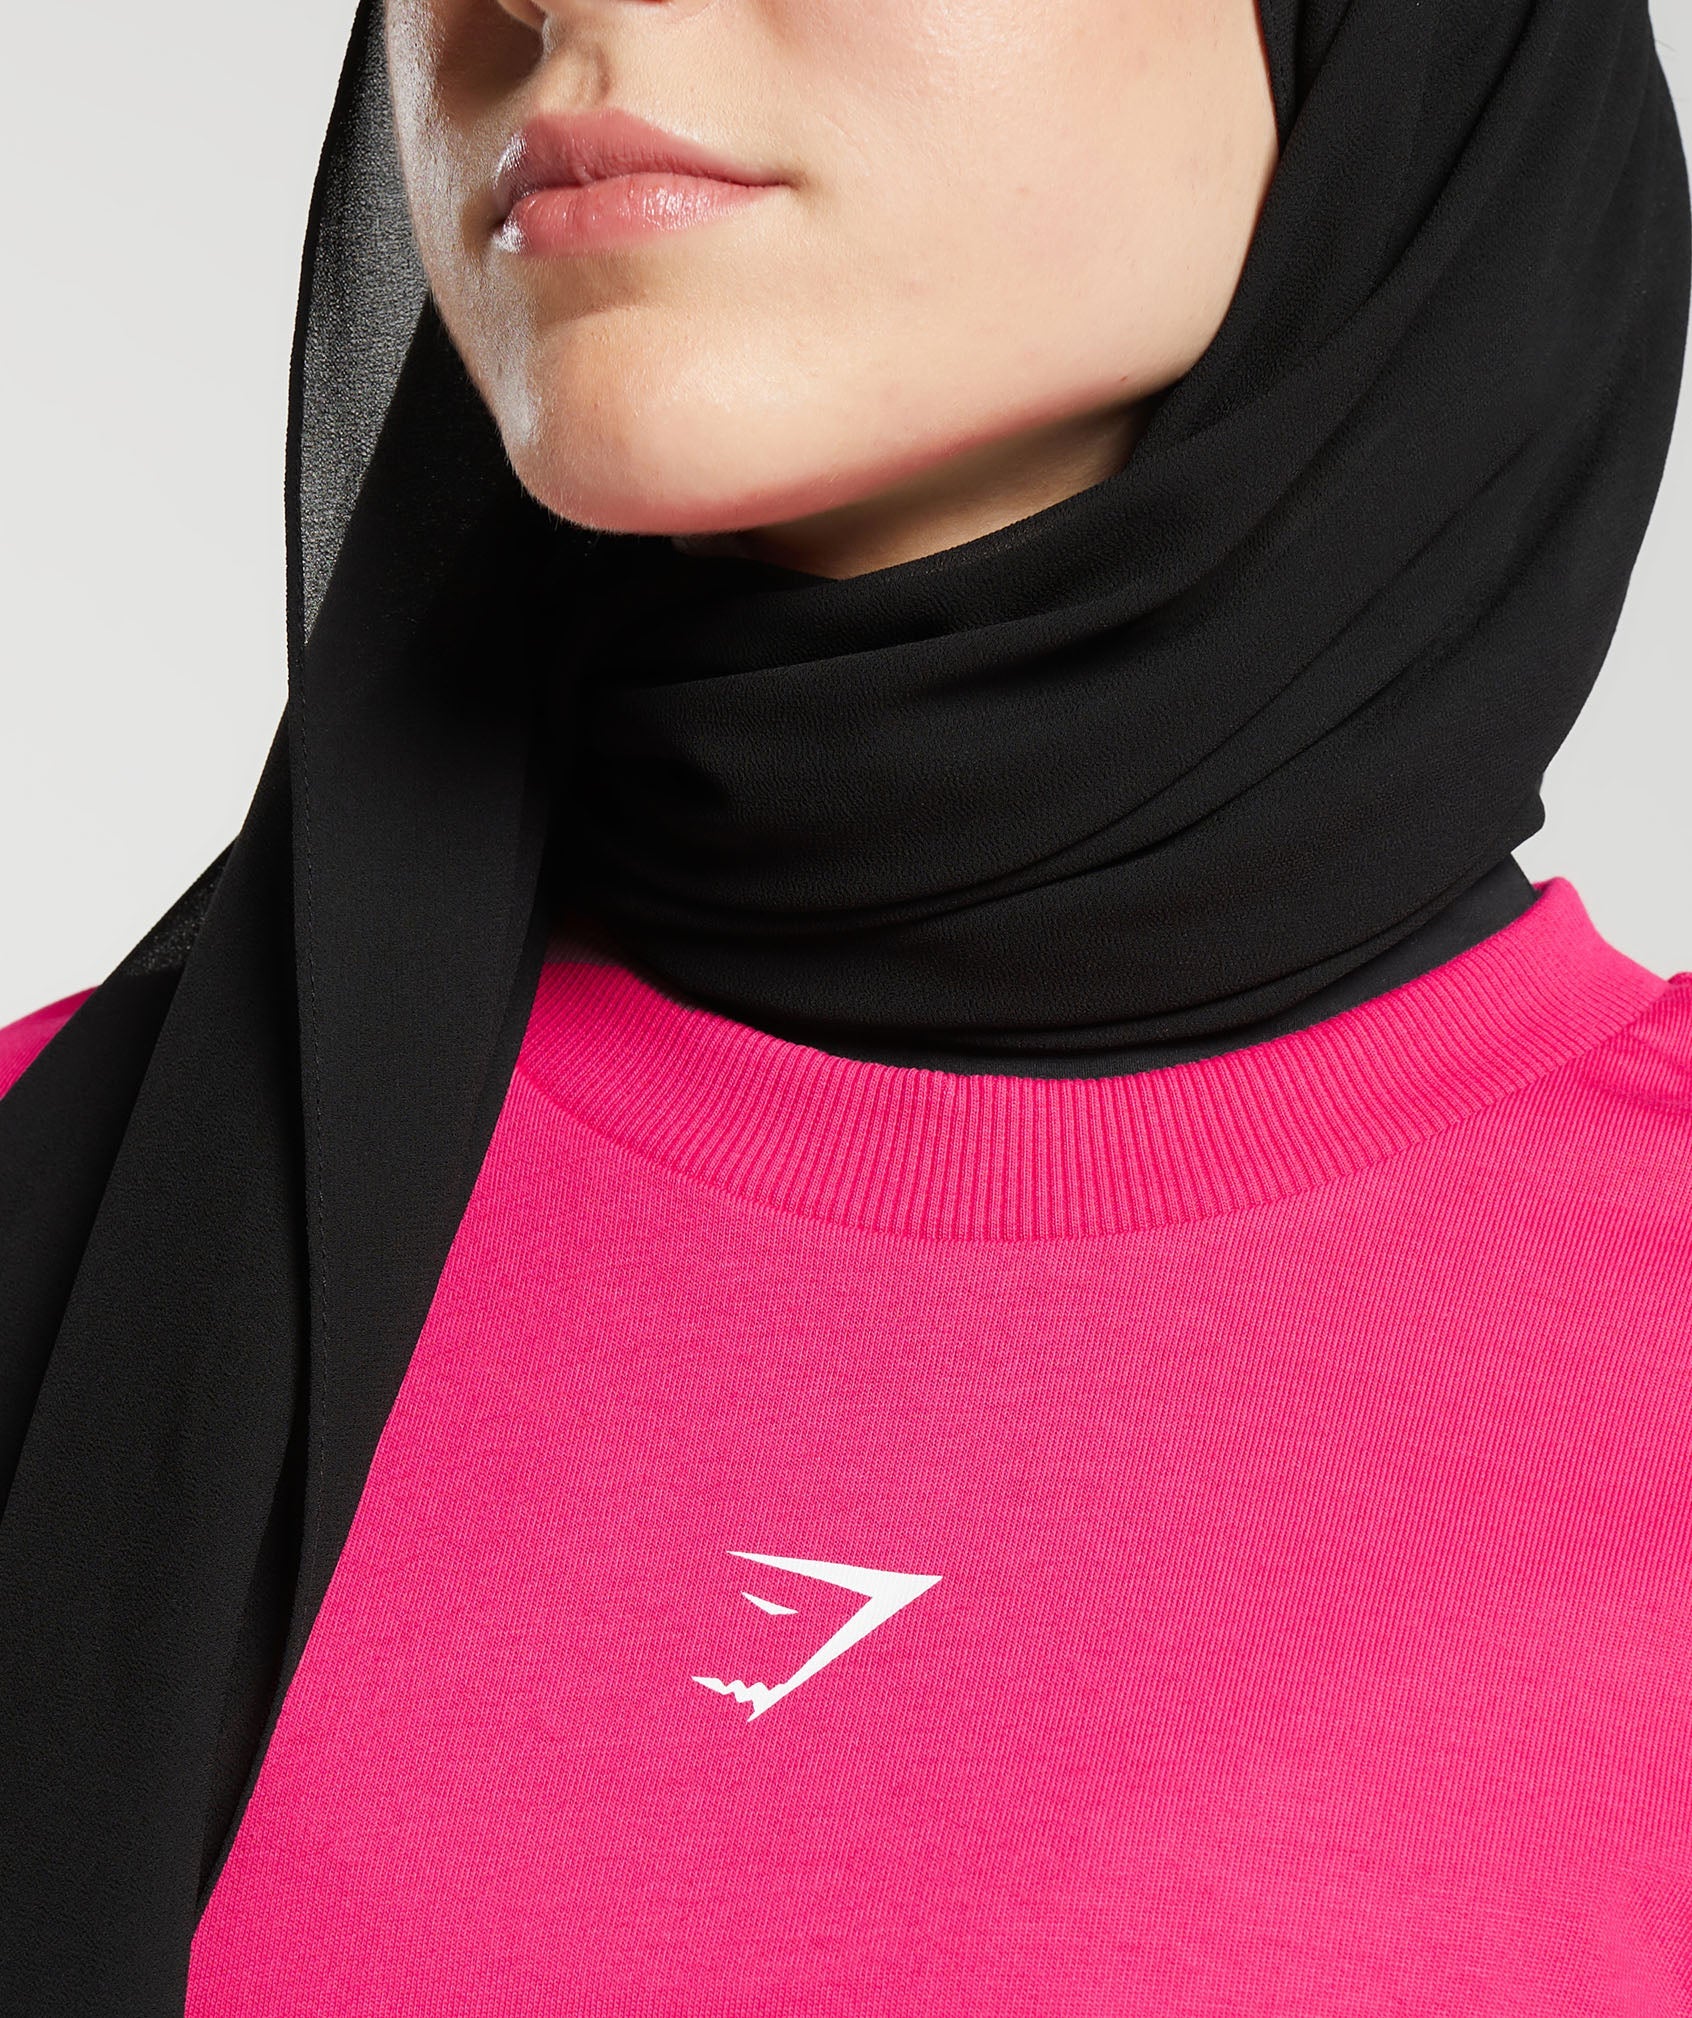 GS X Leana Deeb Graphic Oversized Long Sleeve Top in Impact Pink - view 6